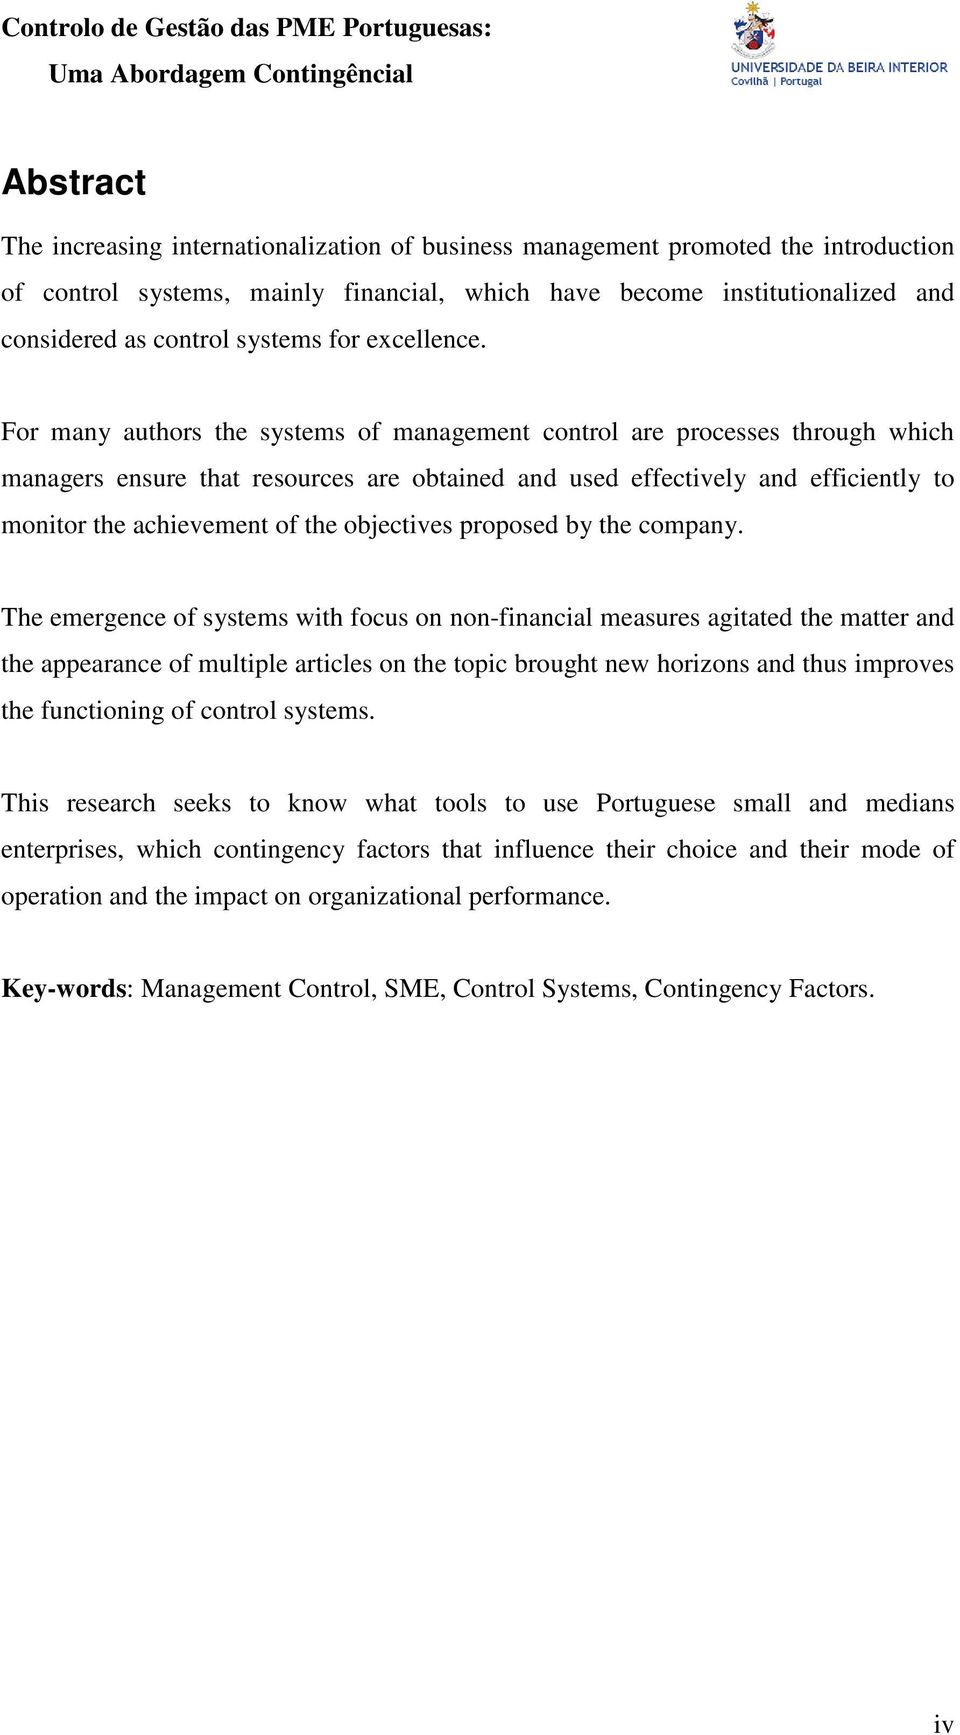 For many authors the systems of management control are processes through which managers ensure that resources are obtained and used effectively and efficiently to monitor the achievement of the